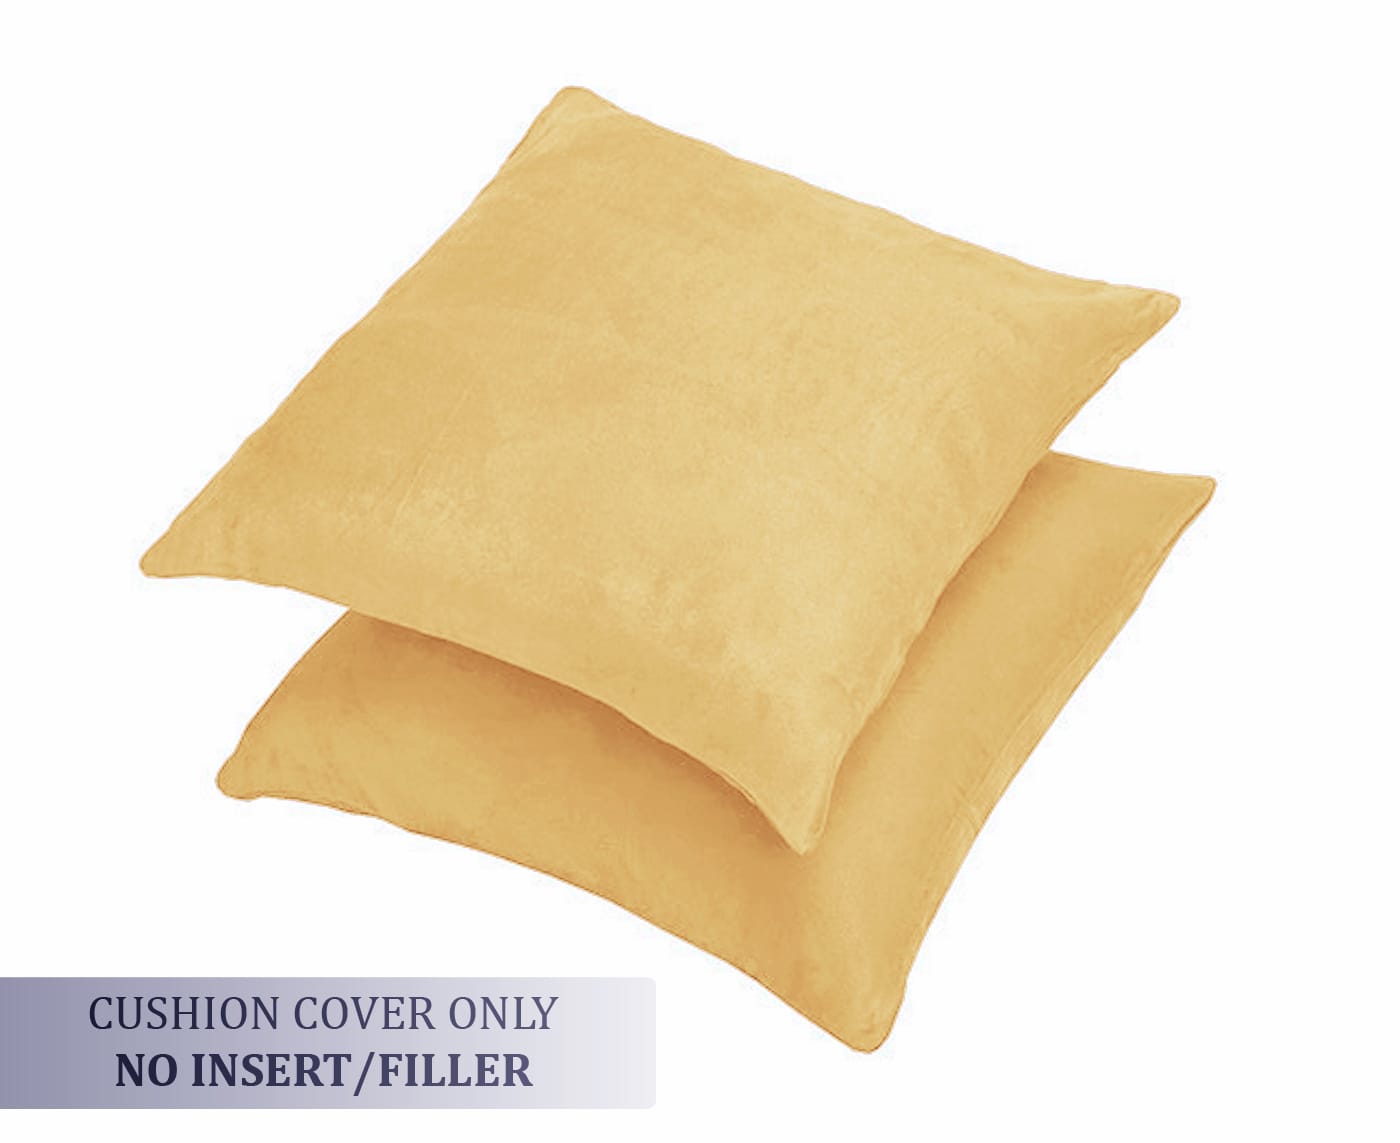 Luxurious Microfiber Suede Velvet Cushion Cover Set in Gold online in India